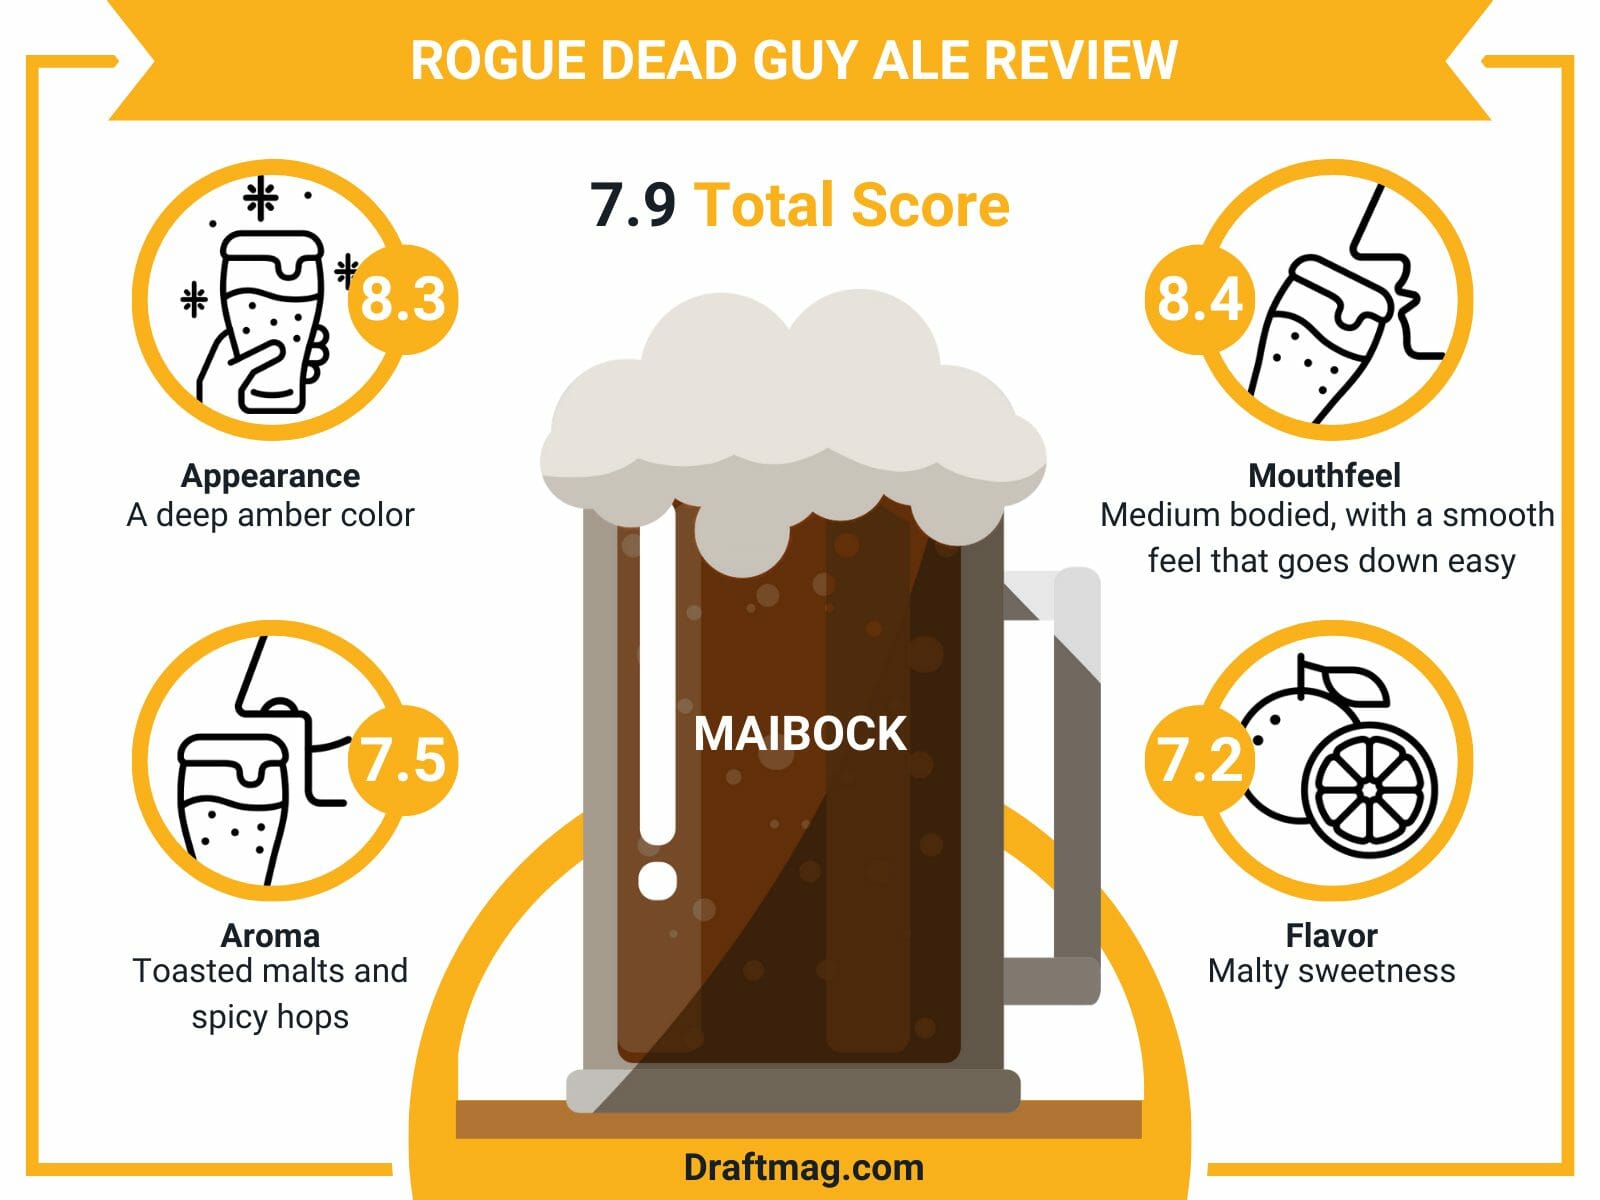 Rogue dead guy ale review infographic